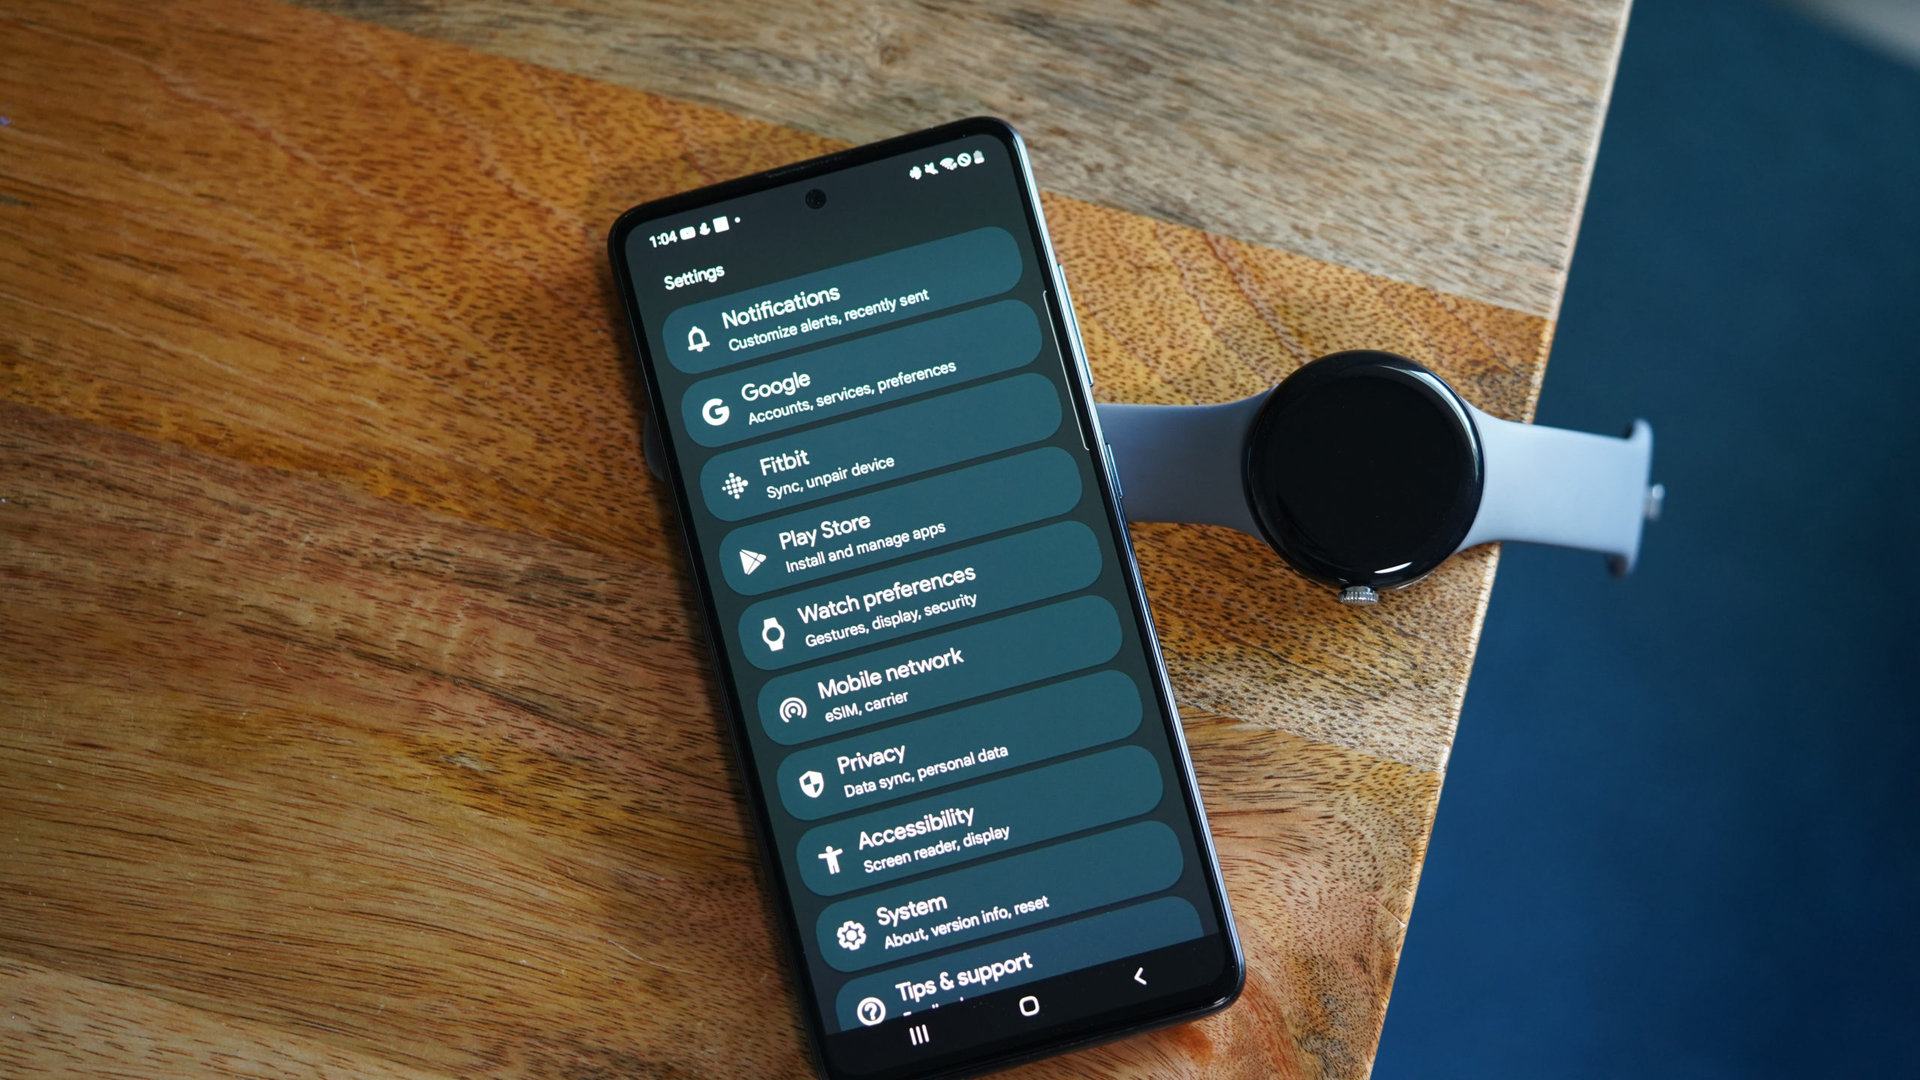 The Galaxy A51 displays the Settings menu in the Pixel Watch app.